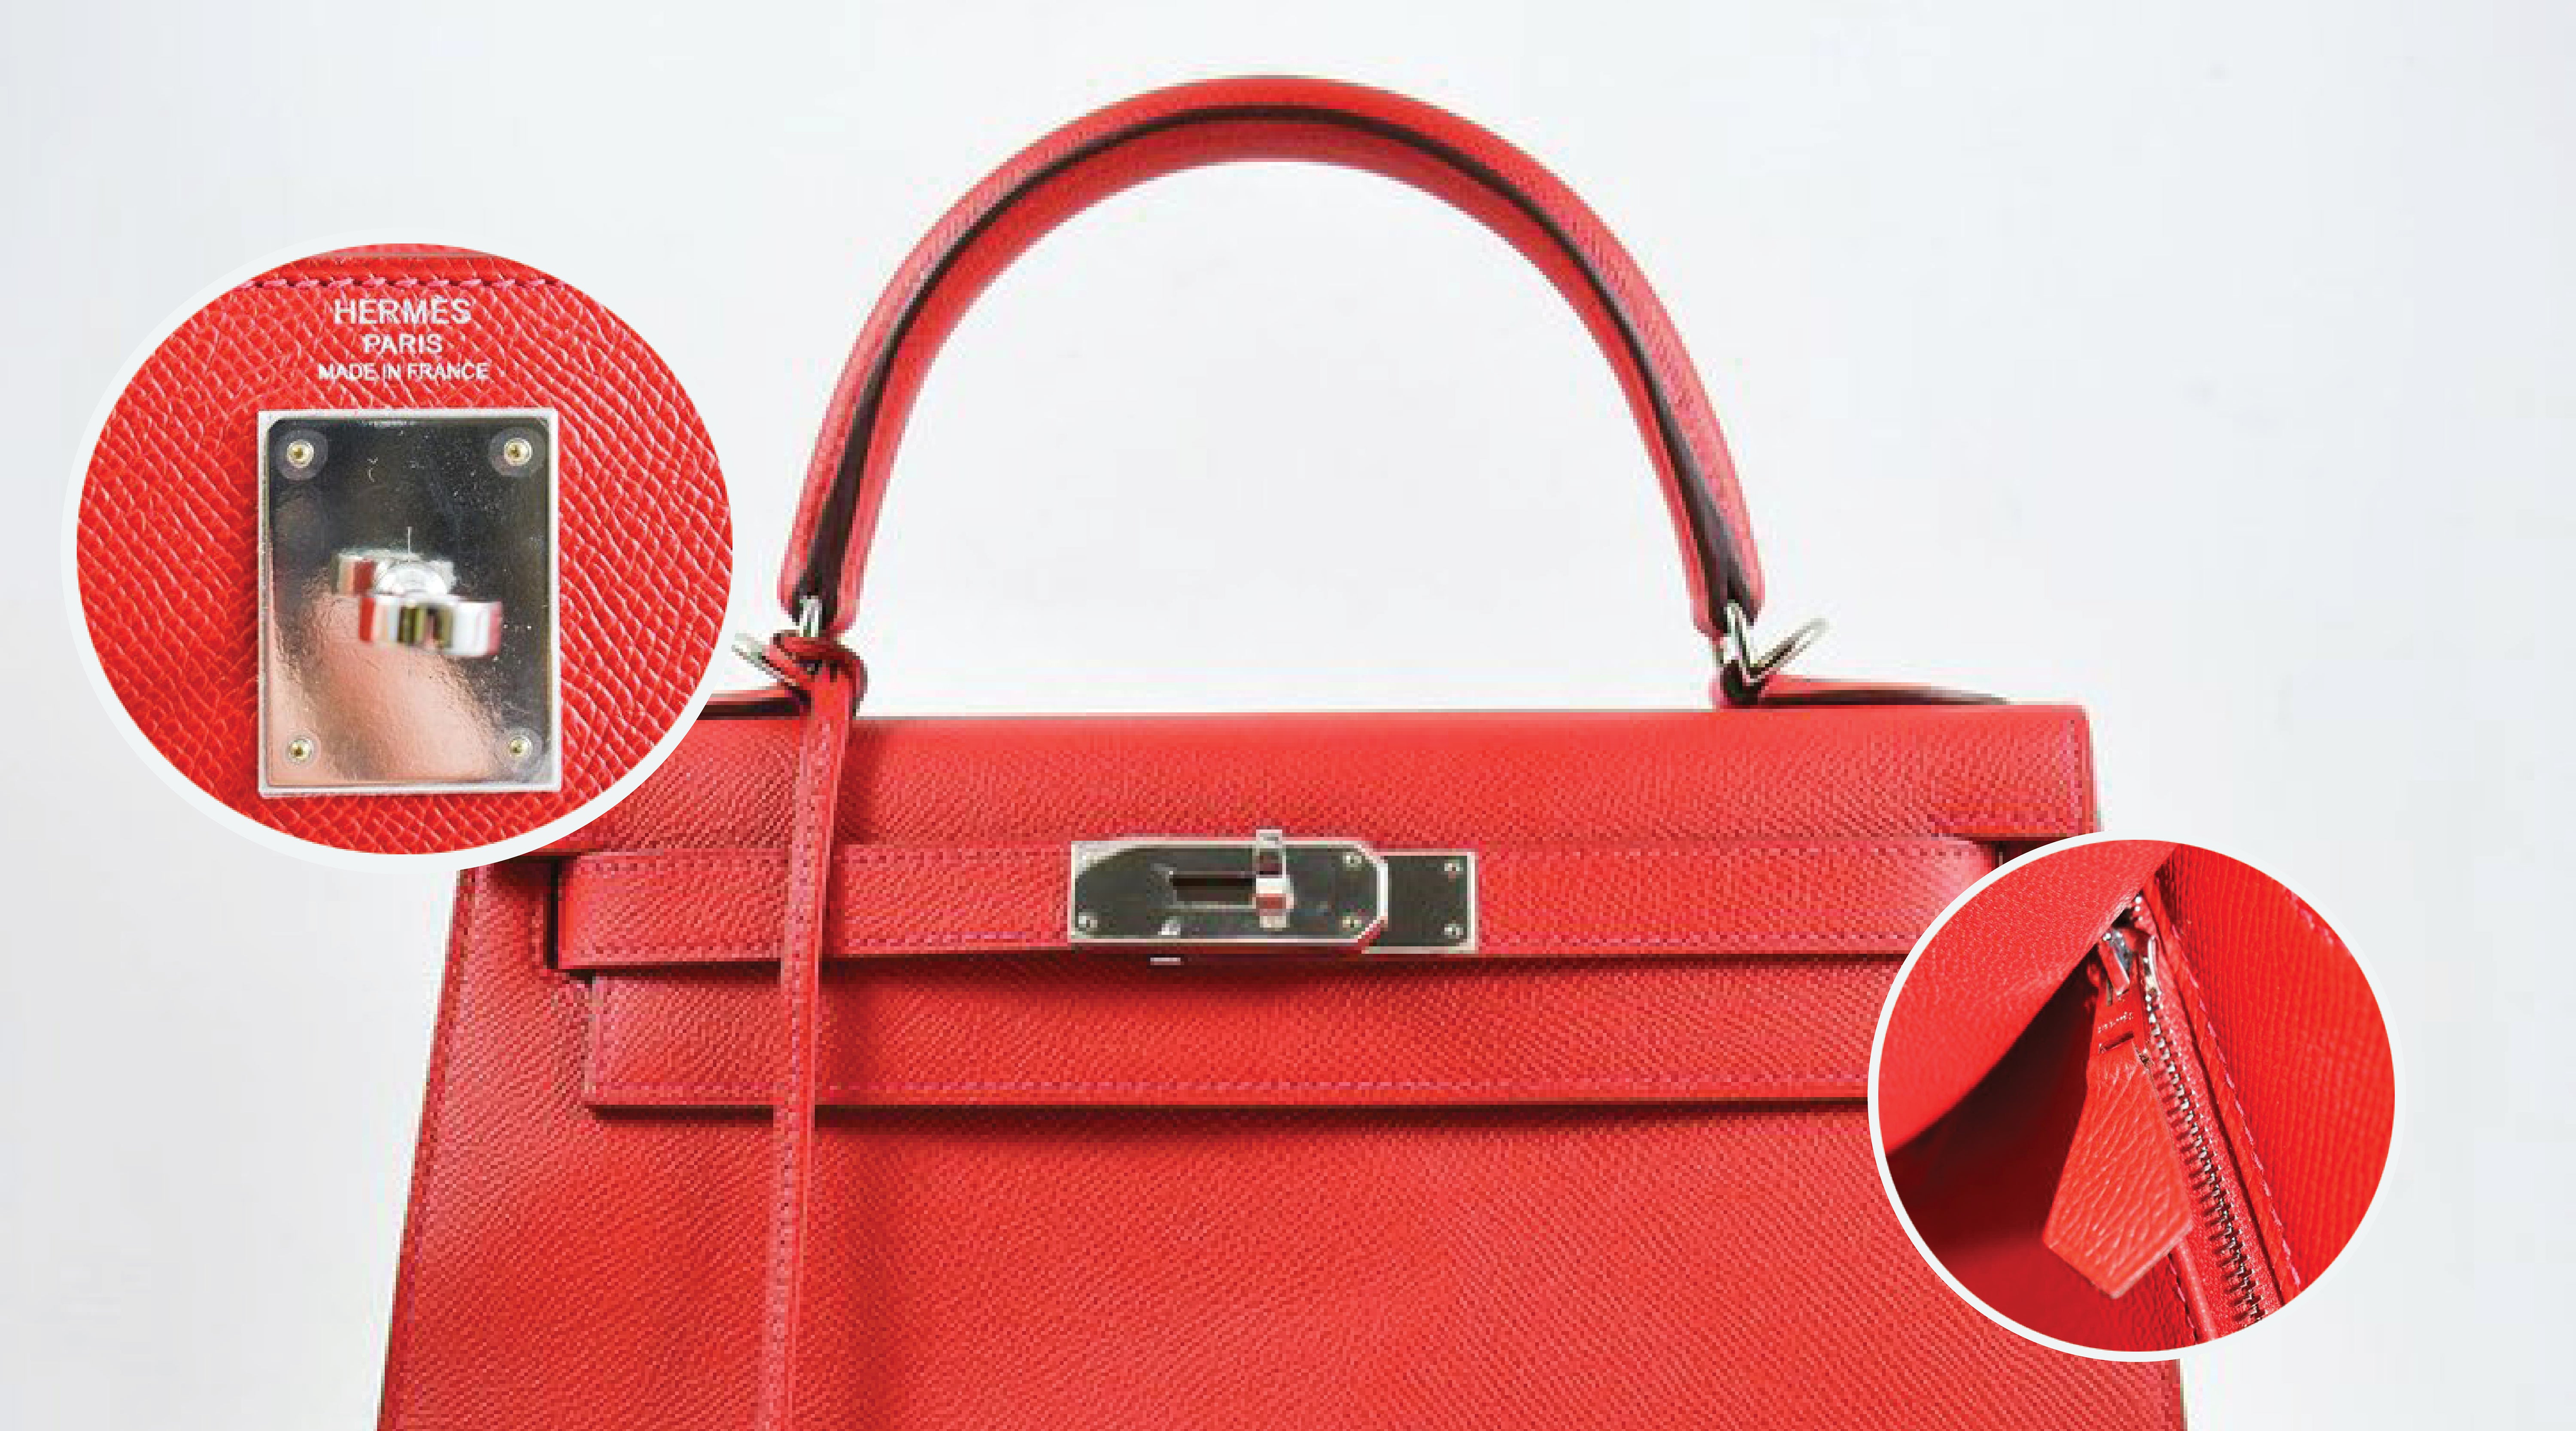 What is the difference between genuine Hermes bags and fake bags? - Quora